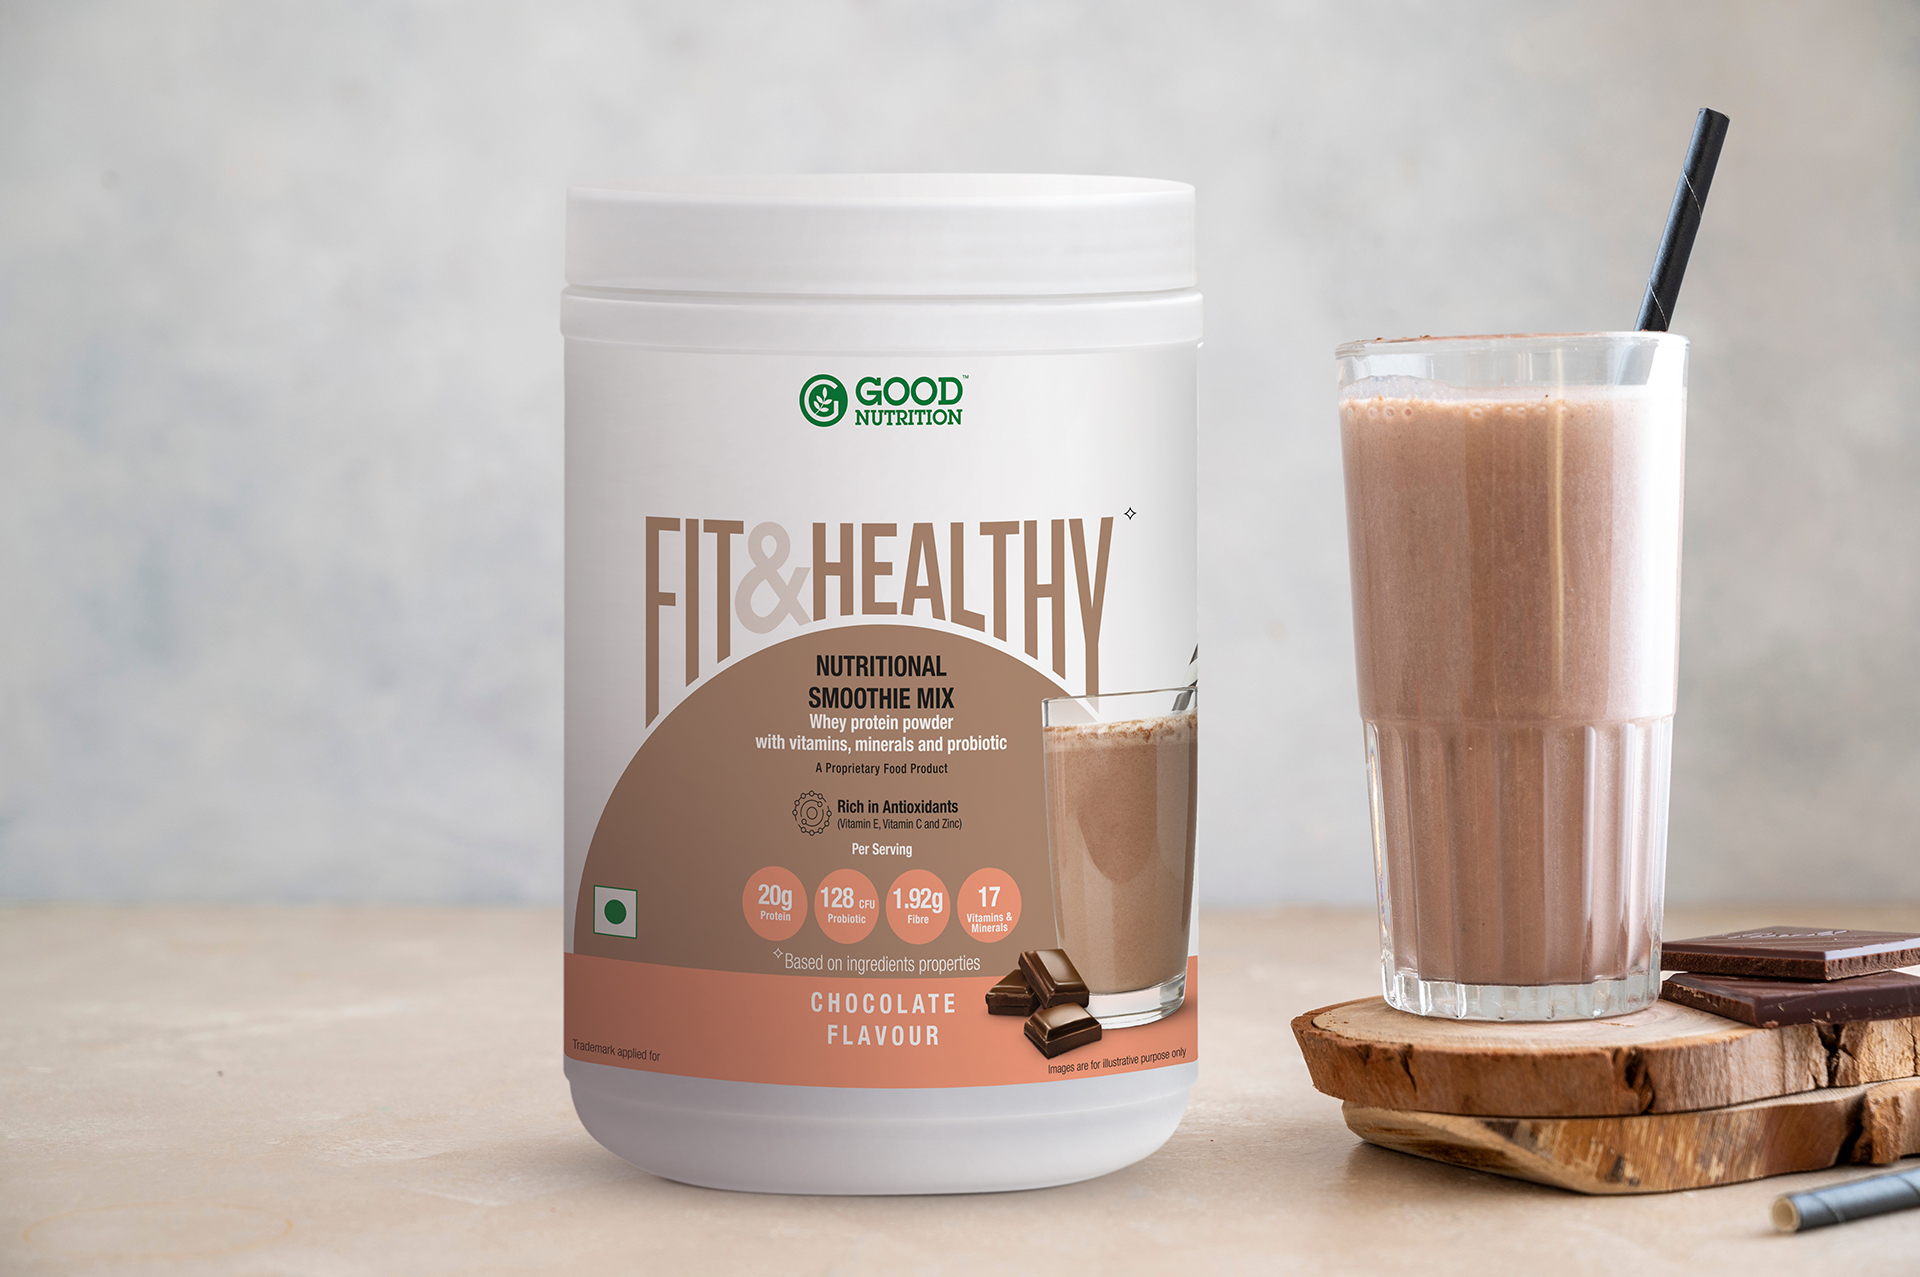 Good Nutrition launched the Fit & Healthy Nutritional Smoothie Mix